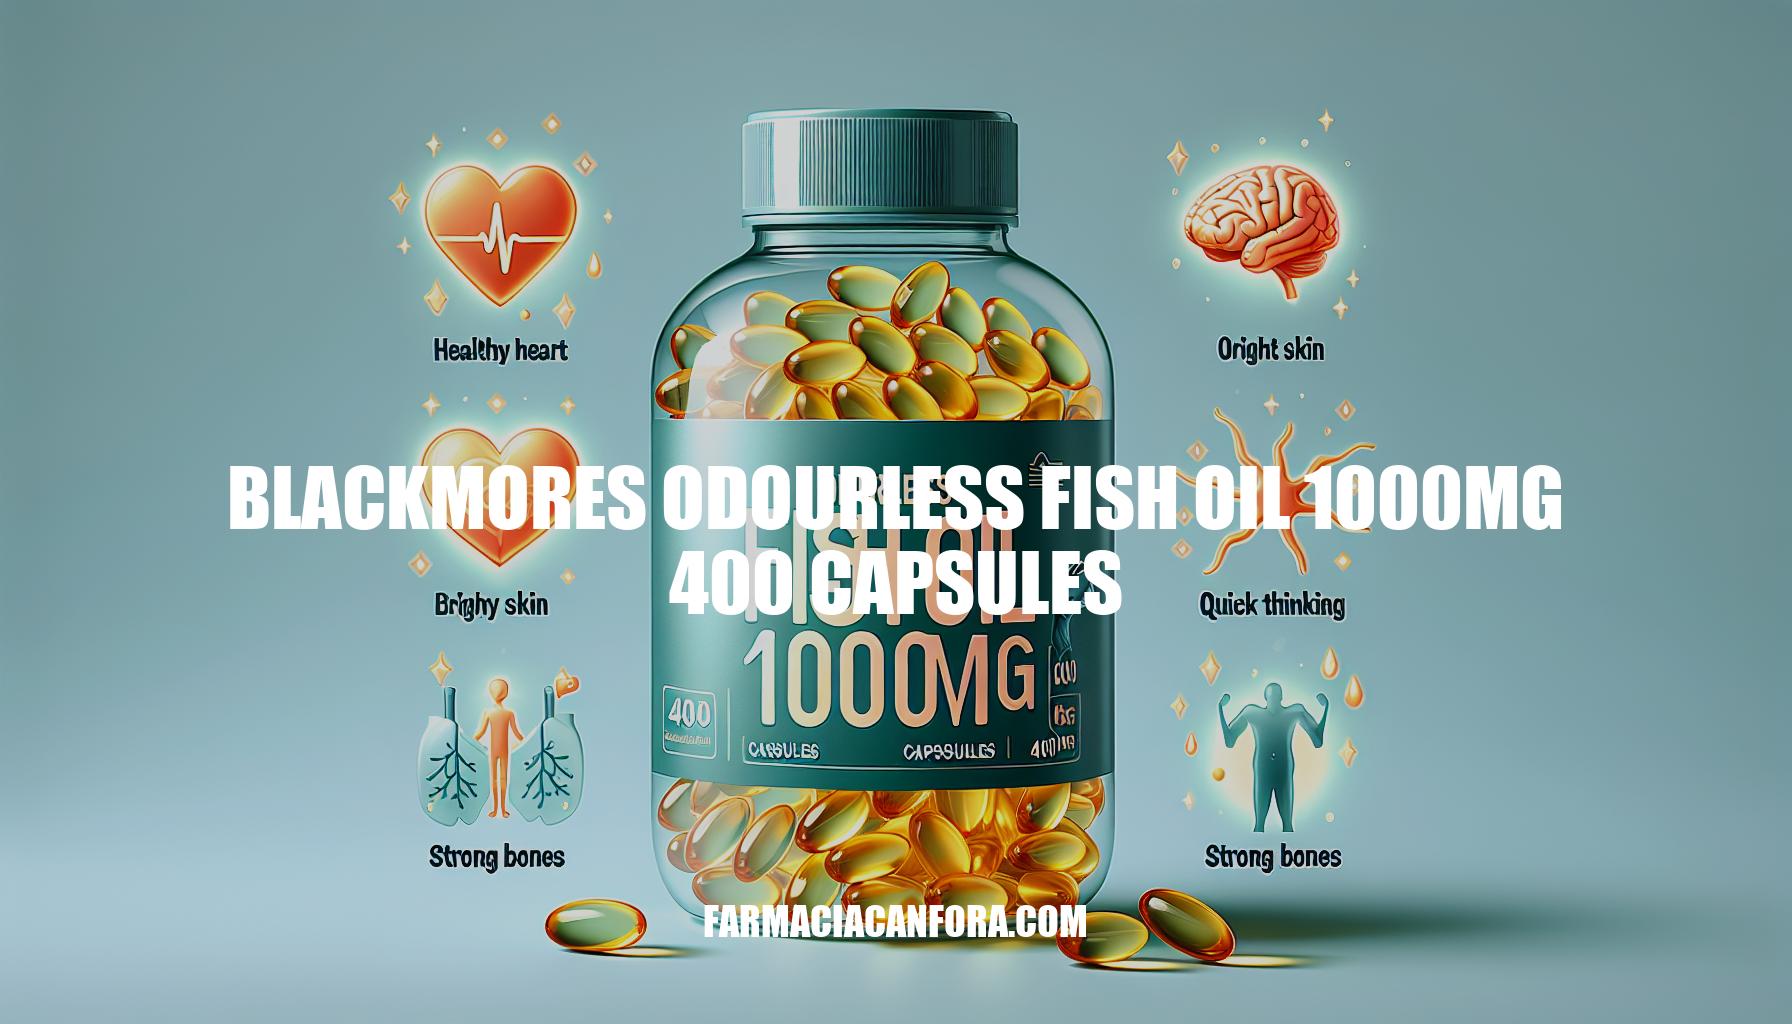 Benefits of Blackmores Odourless Fish Oil 1000mg 400 Capsules